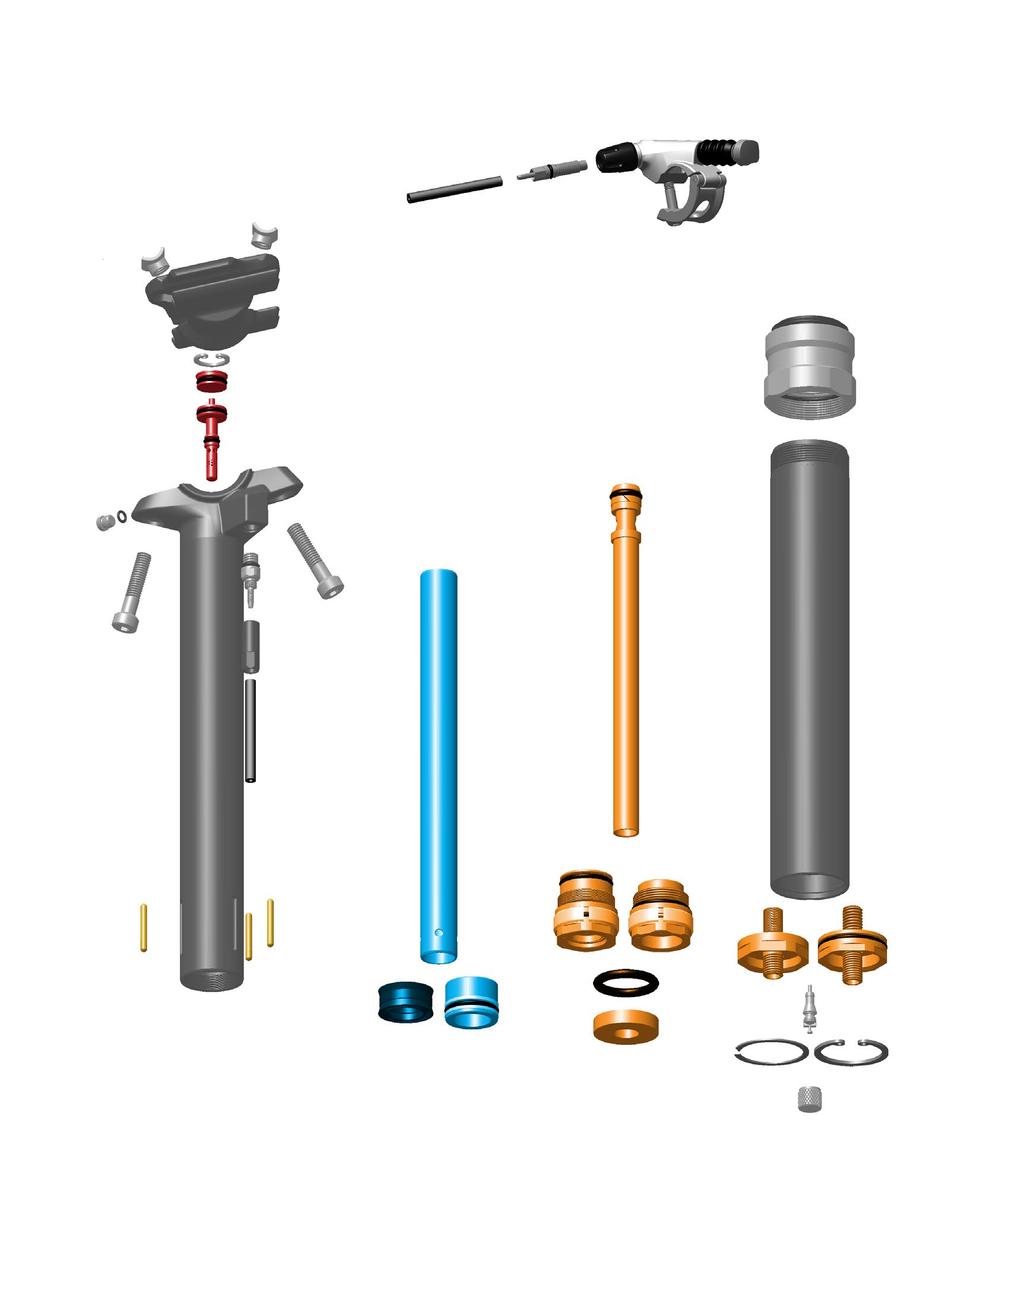 Exploded View - Component Inner Shaft Assembly Internal Floating Piston Assembly Remote Lever Actuator Poppet Valve Assembly Remote Lever Hose Barb Hydraulic Hose Saddle Clamp